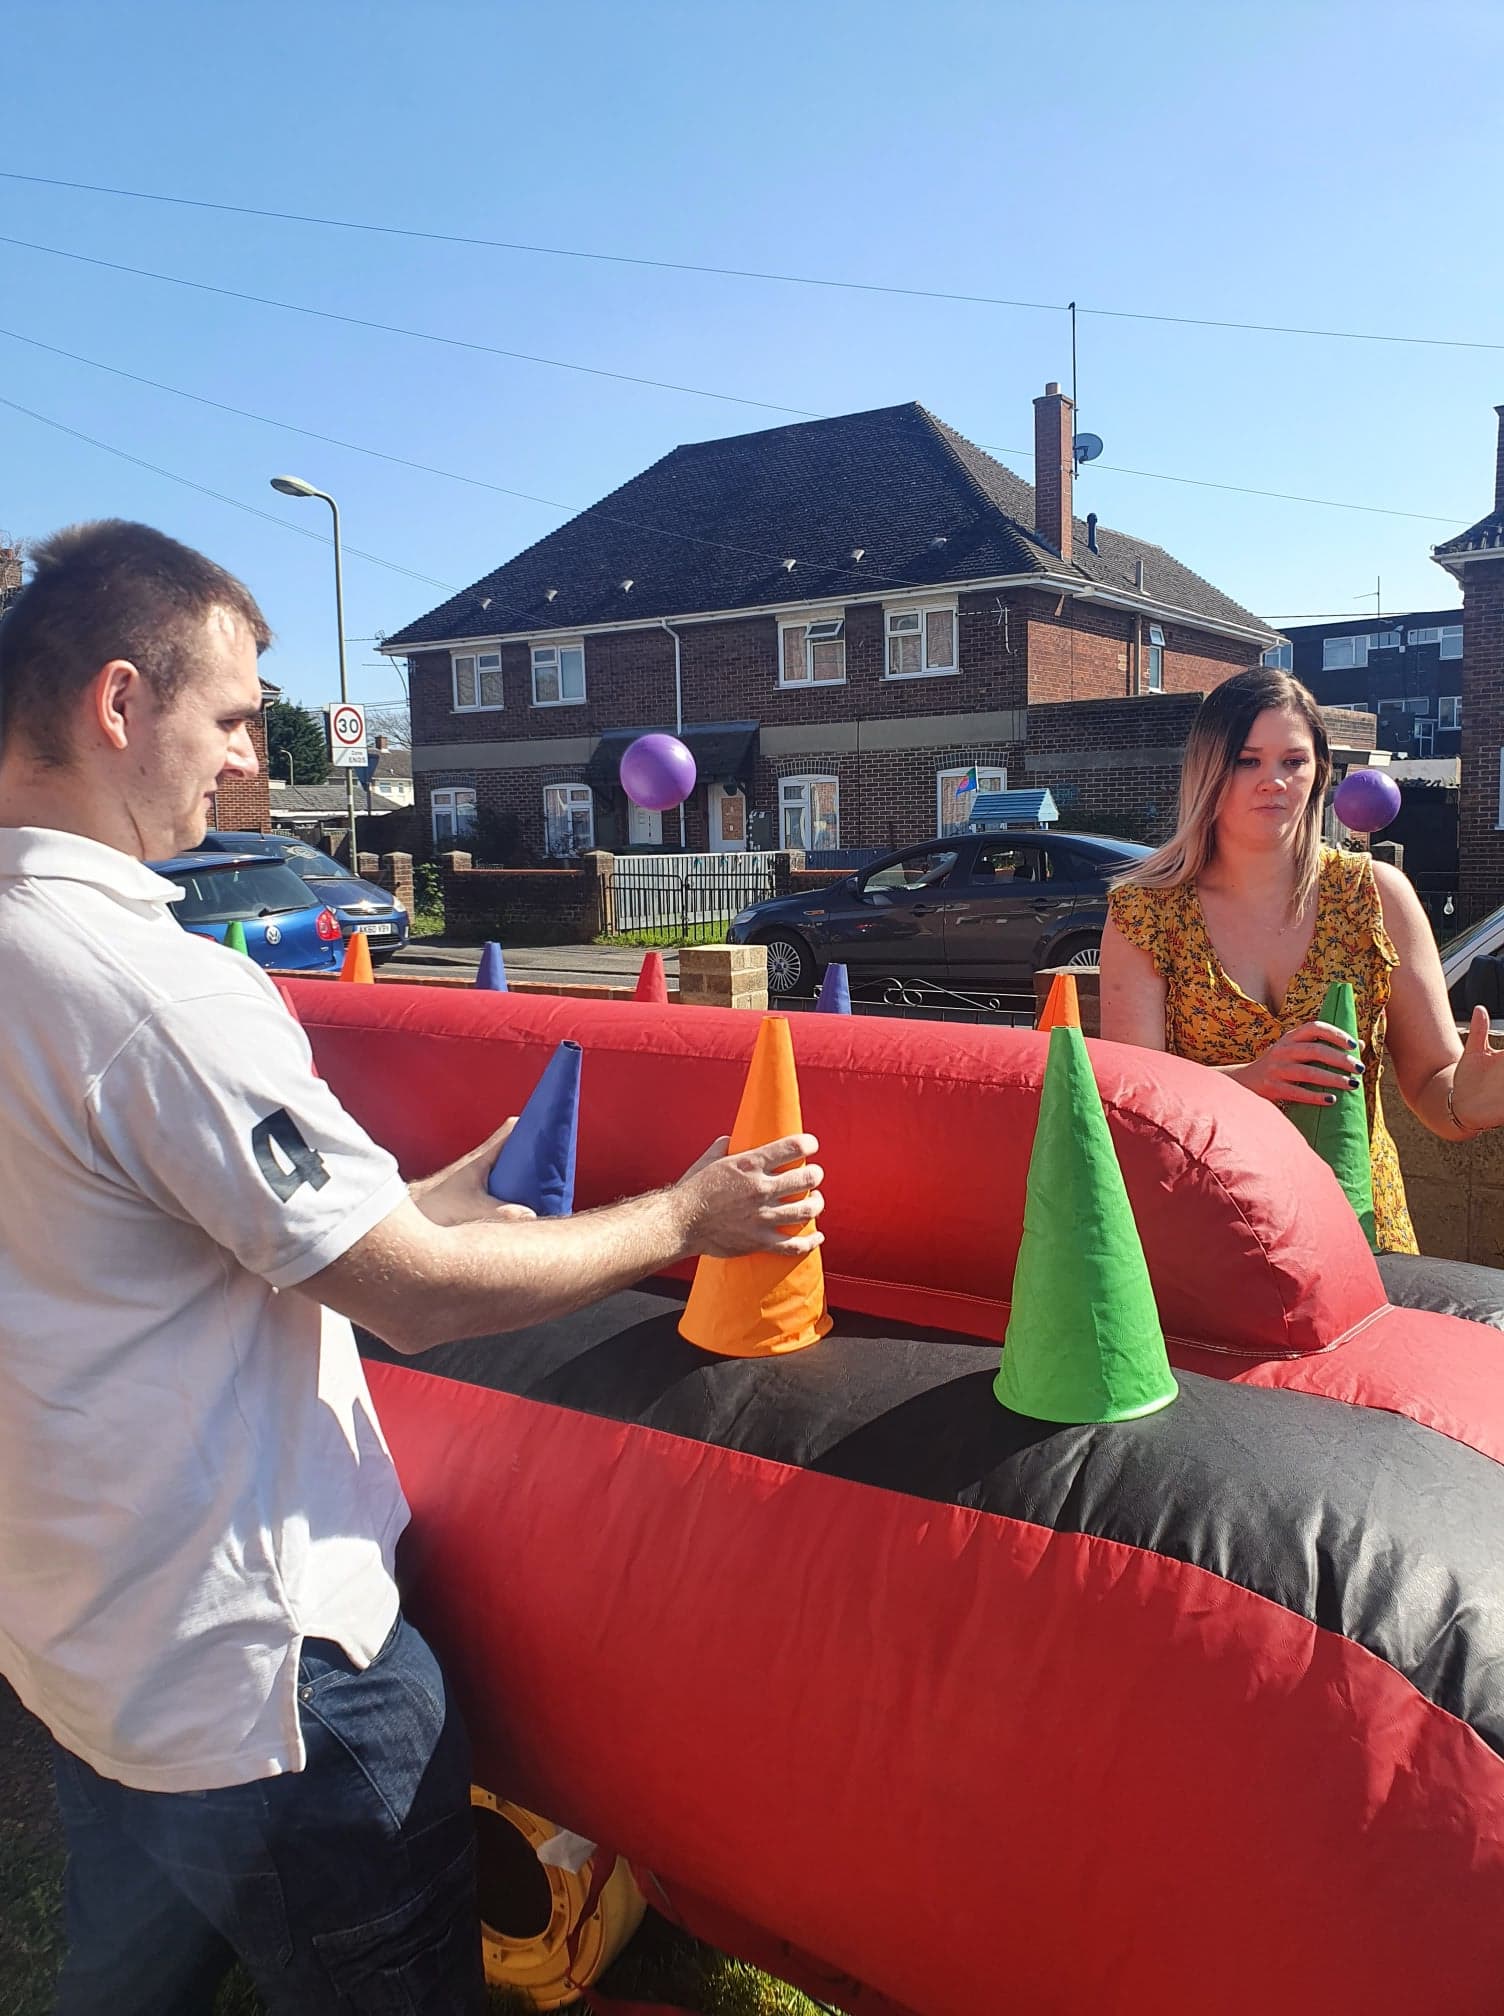 Night Club Summer Package Bouncy Castle And Soft Play Hire In Abingdon Didcot Wantage Oxford